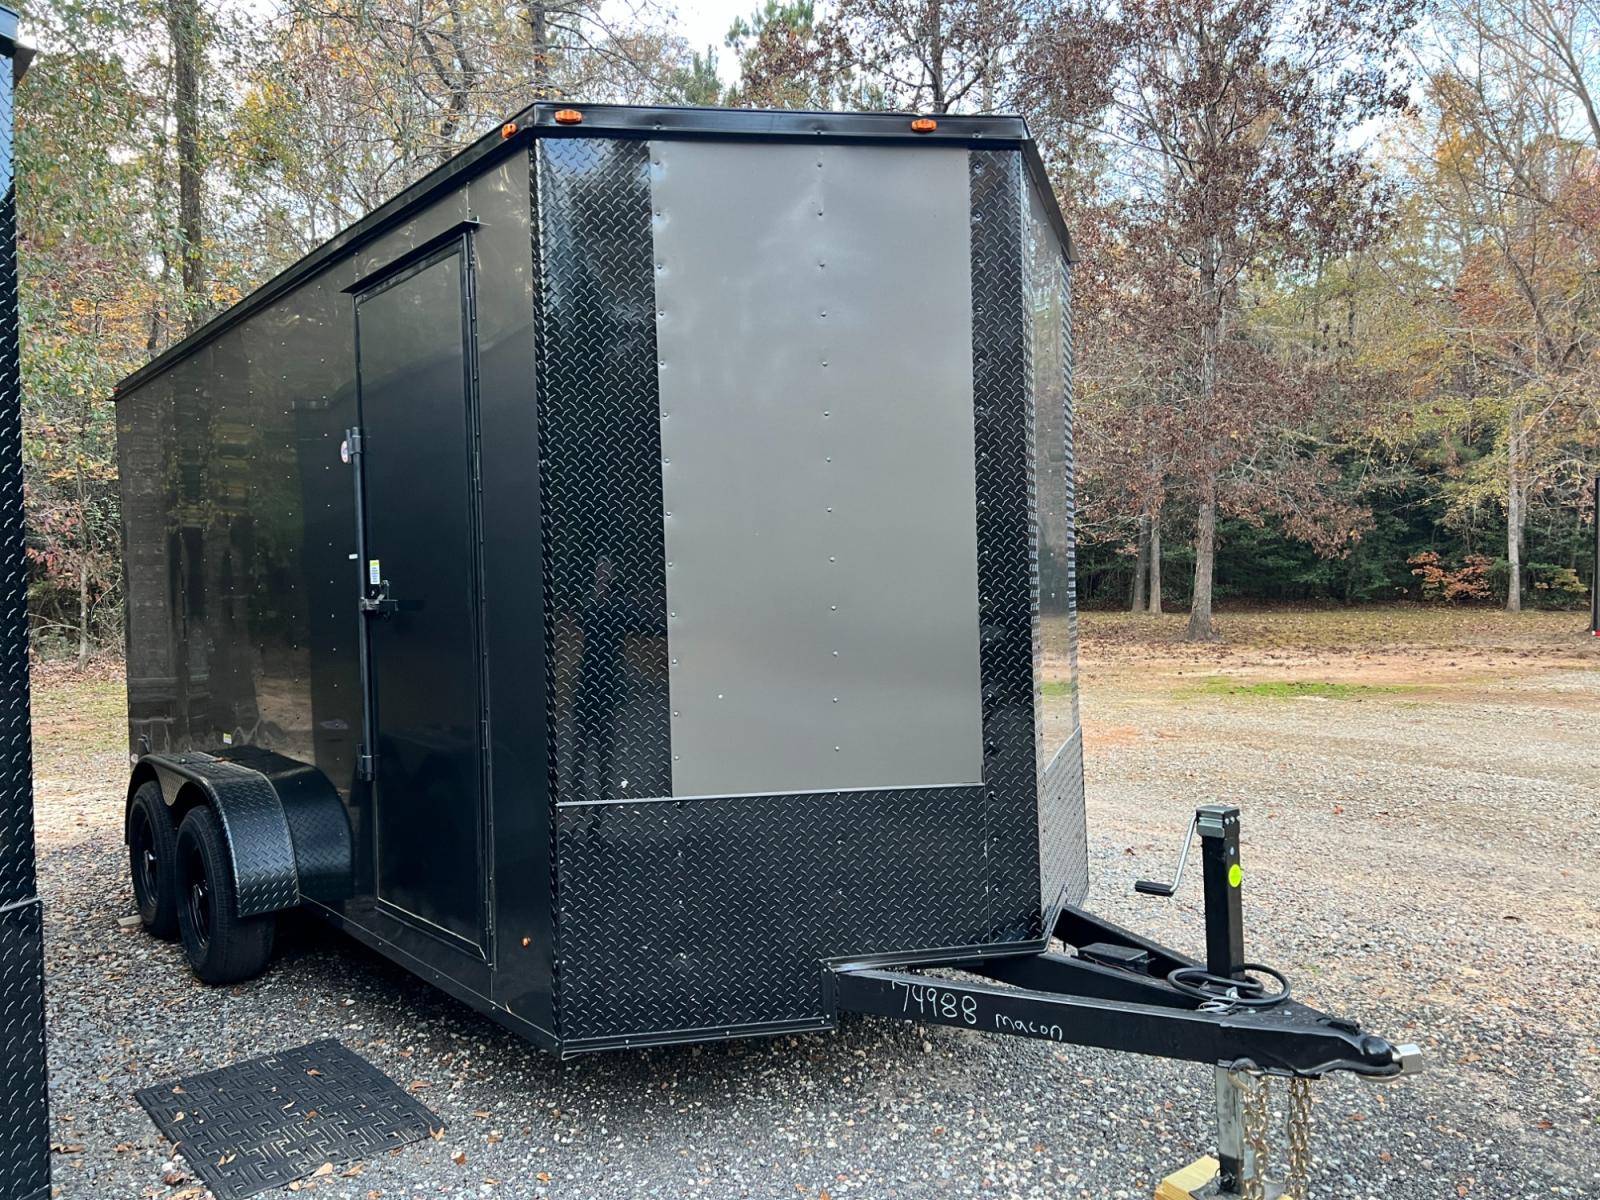 2023 .080 Charcoal Elite Cargo 7ft X 16ft Tandem 5K lb Axles! , located at 1330 Rainey Rd., Macon, 31220, (478) 960-1044, 32.845638, -83.778687 - Brand New 2023 "Top of the Line" Elite Cargo Trailer, Made in South Ga. Awesome 7ft X 16ft Tandem Enclosed Cycle Hauler & Cargo Trailer! Taller Inside Height is 7ft 6" Tall Inside & the Ramp Door Clearance is 7ft, at the Back Door! Up-Graded Larger 5k lb Dexter Brake Axles! Larger 225/75/15" 10 - Photo #1